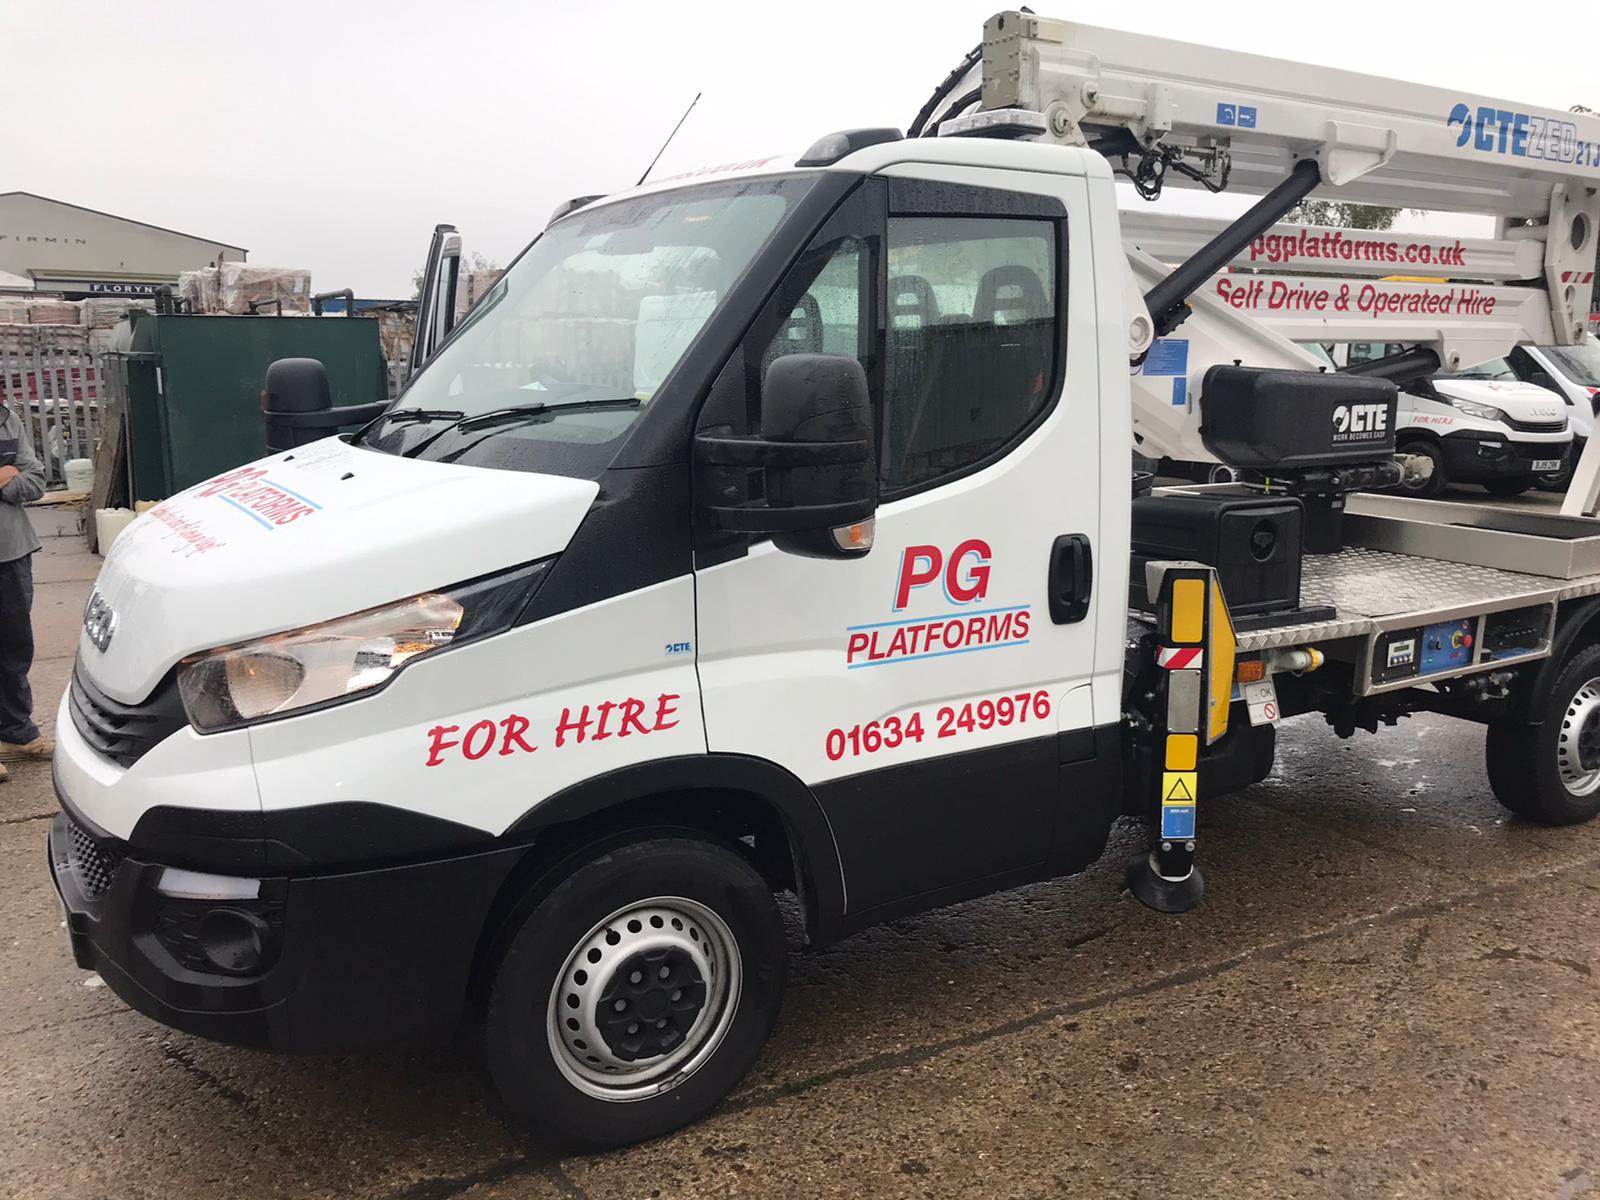 CTE Z21 vehicle mounted lift hire from PG Platforms